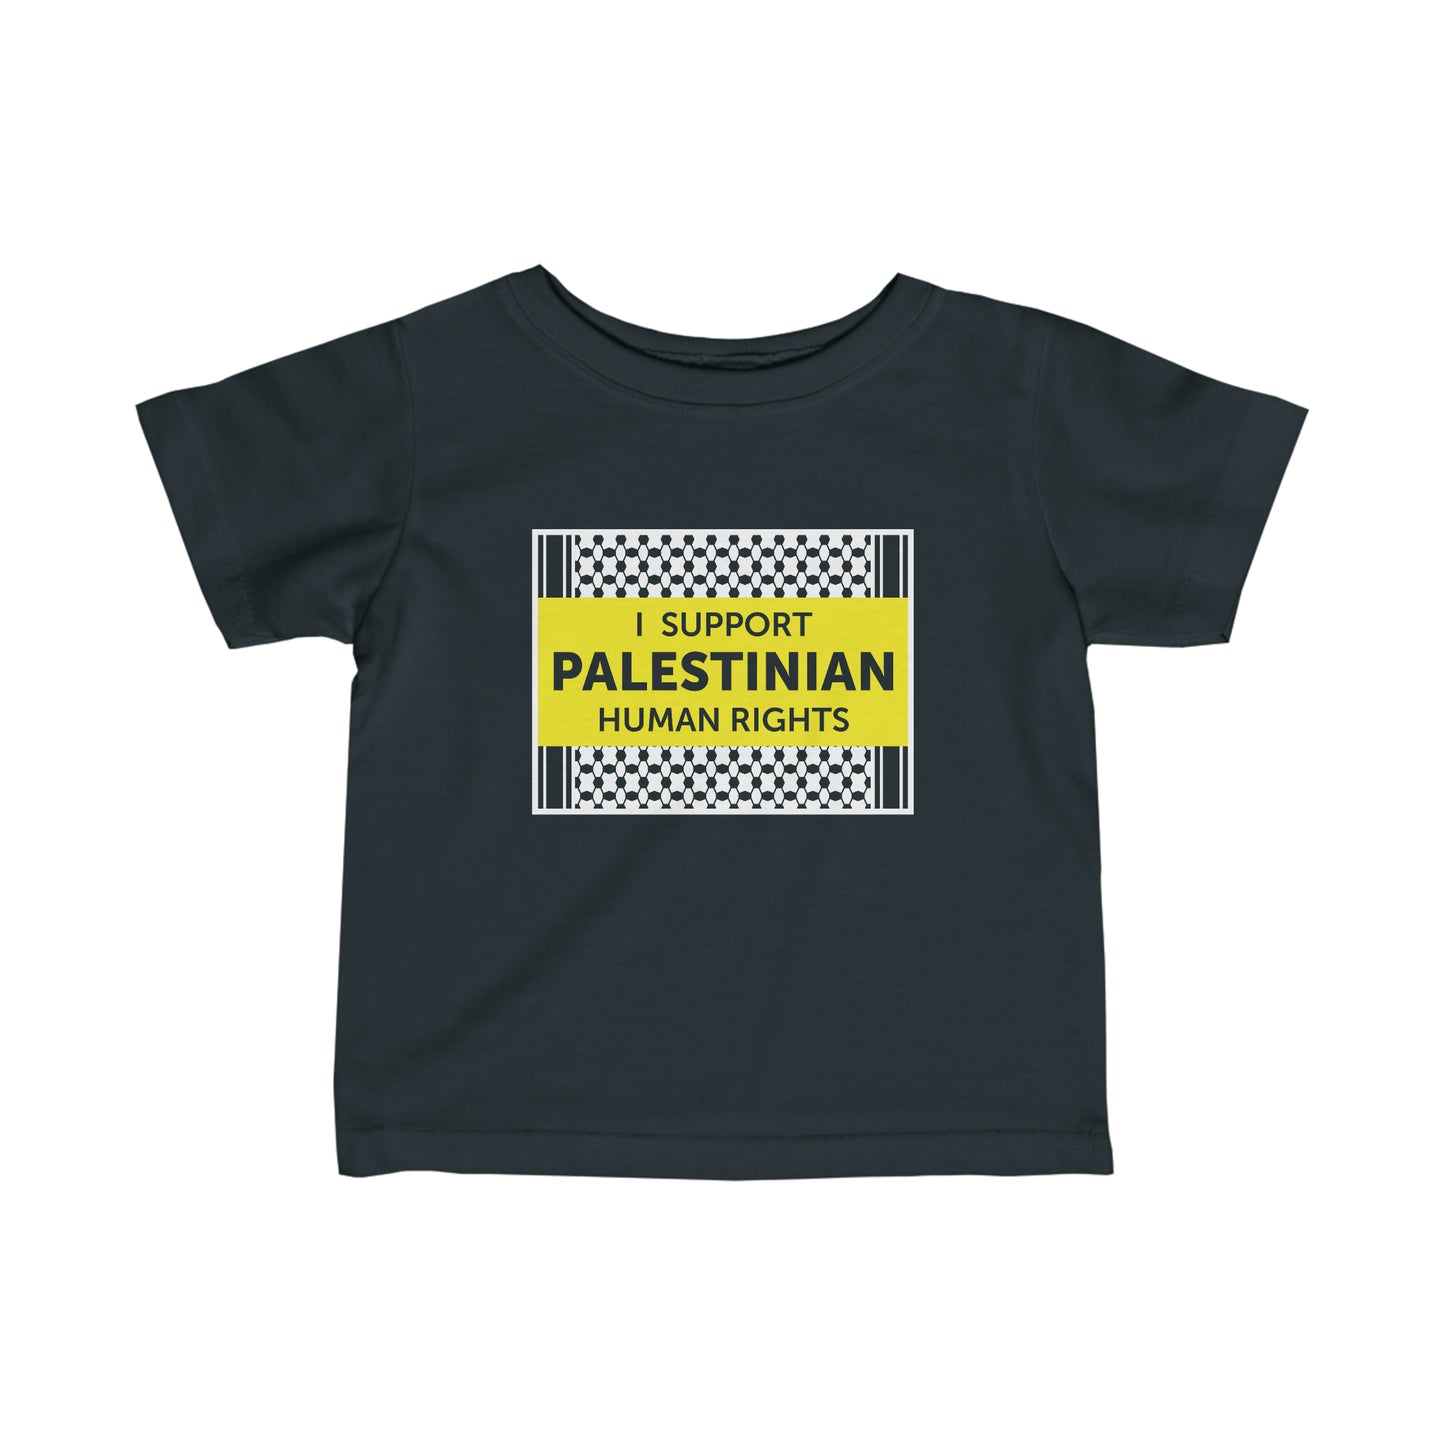 “I Support Palestinian Human Rights” Infant Tee